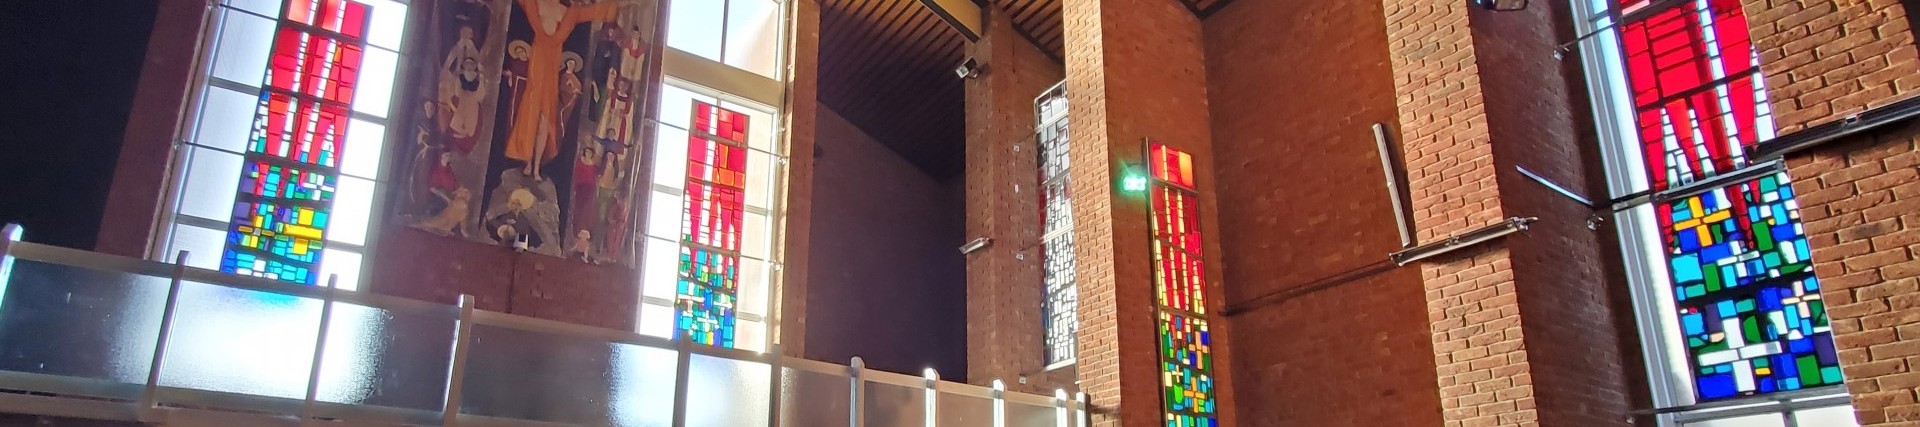 Brick interior of a church with colourful stain glass panels suspended in front of plain windows.